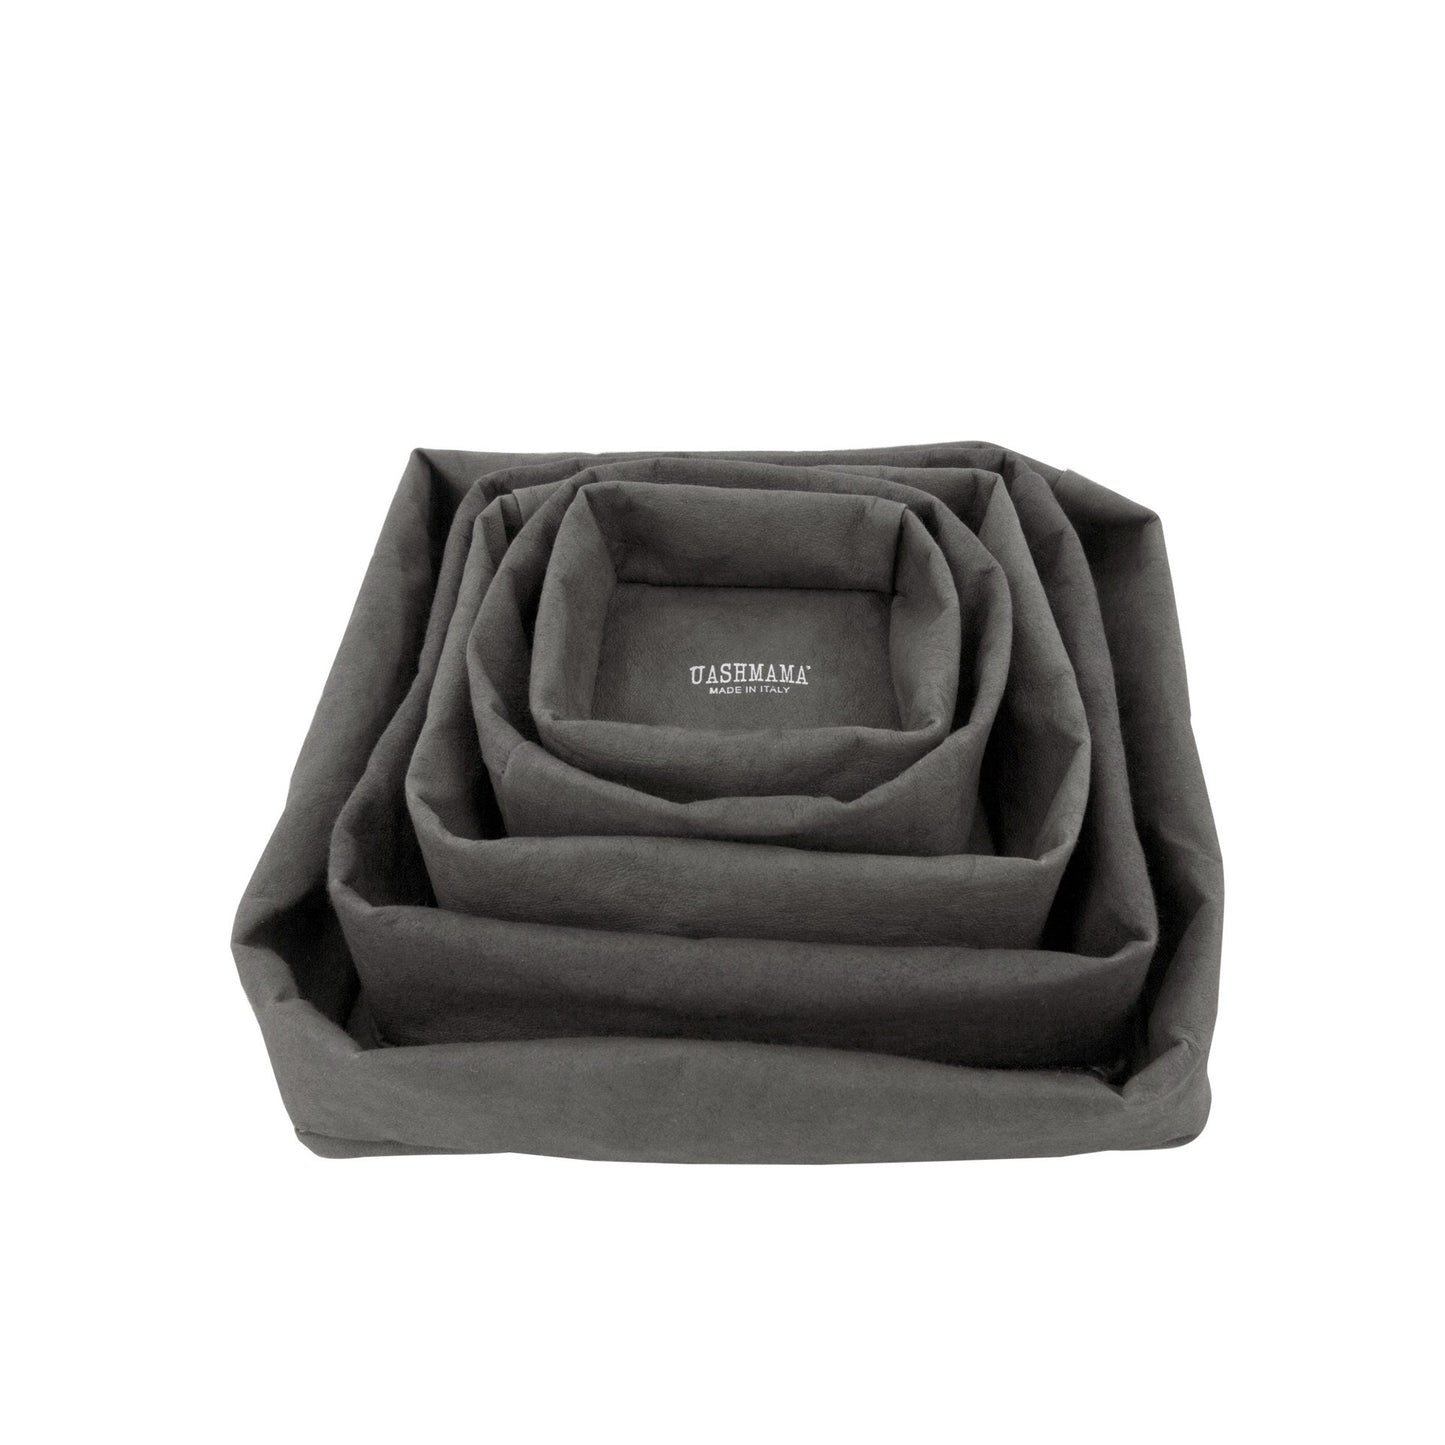 A stack of five washable paper trays is shown in grey, one inside the other as a nest.